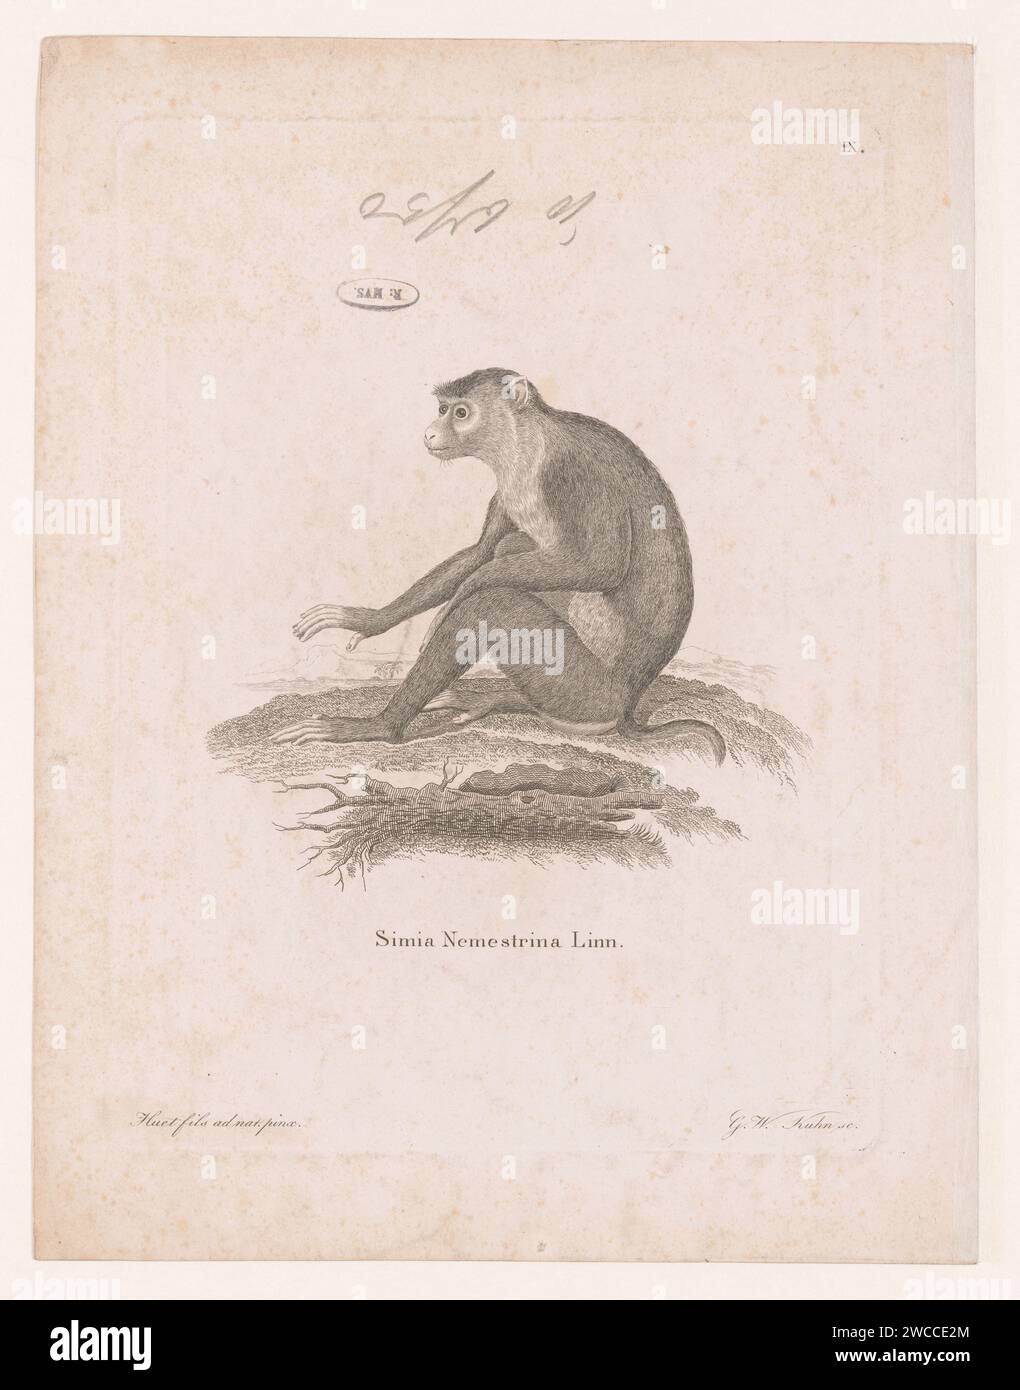 Makaak sitting in a landscape, G.W. Kuhn, 1766 - 1799 print According to the title it concerns the Lampongaap (Simia Nemestrina) described by Carolus Linnaeus. Numbered at the top right: IX. Leipzig paper steel engraving monkeys, apes Stock Photo